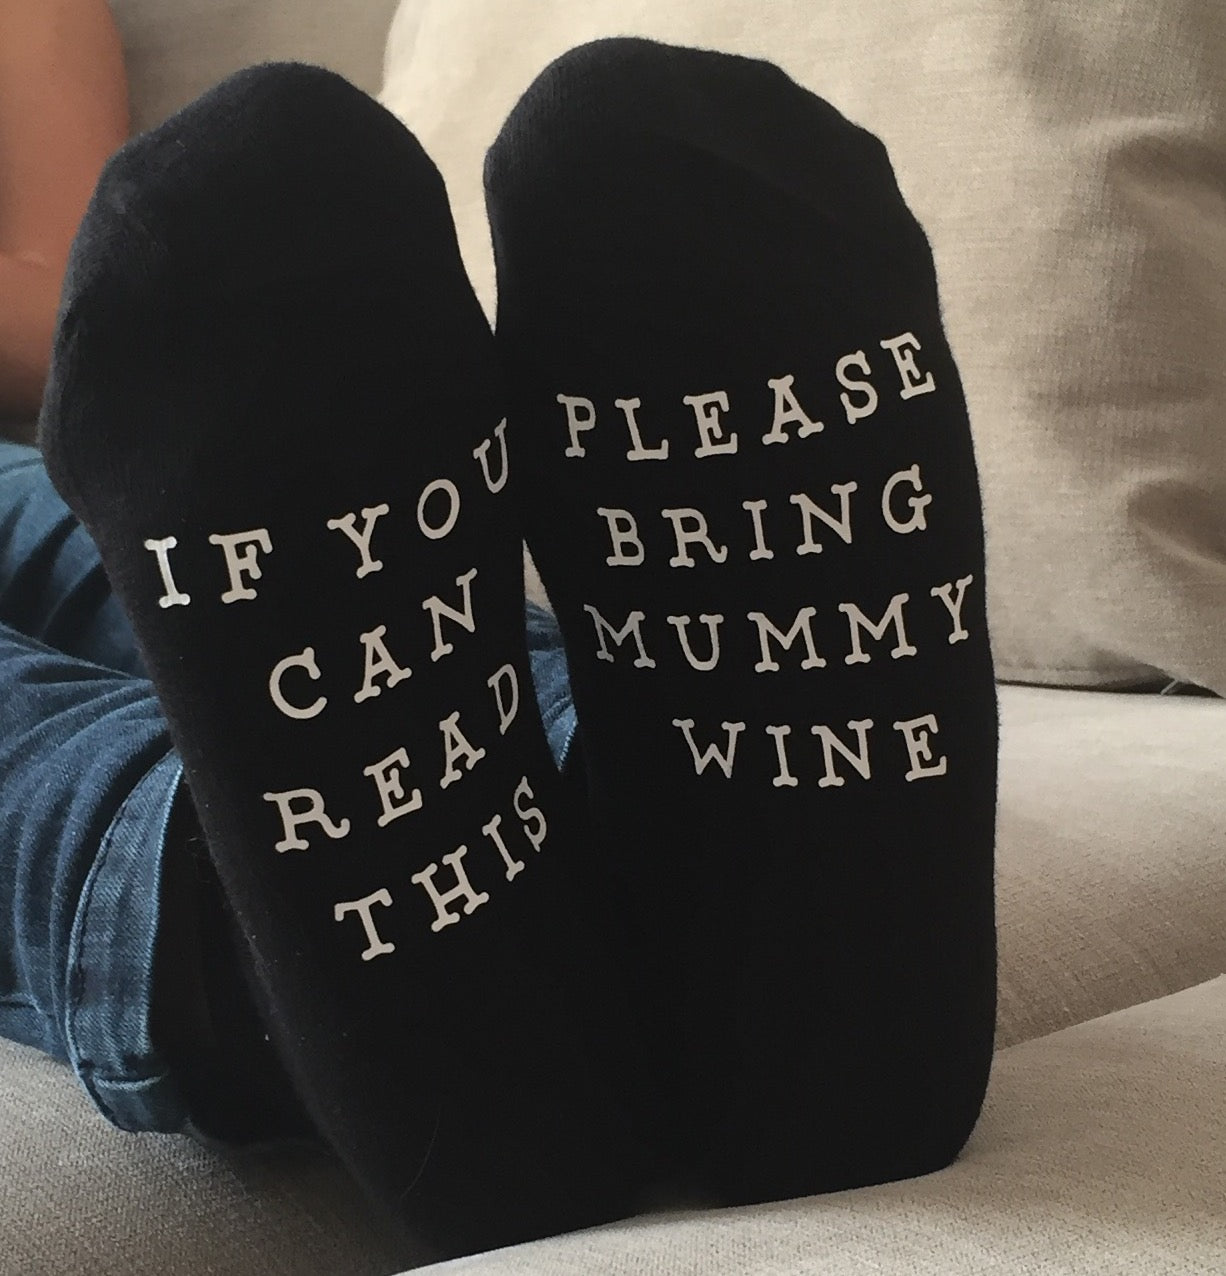 If you can read this, please bring ... SOCKS